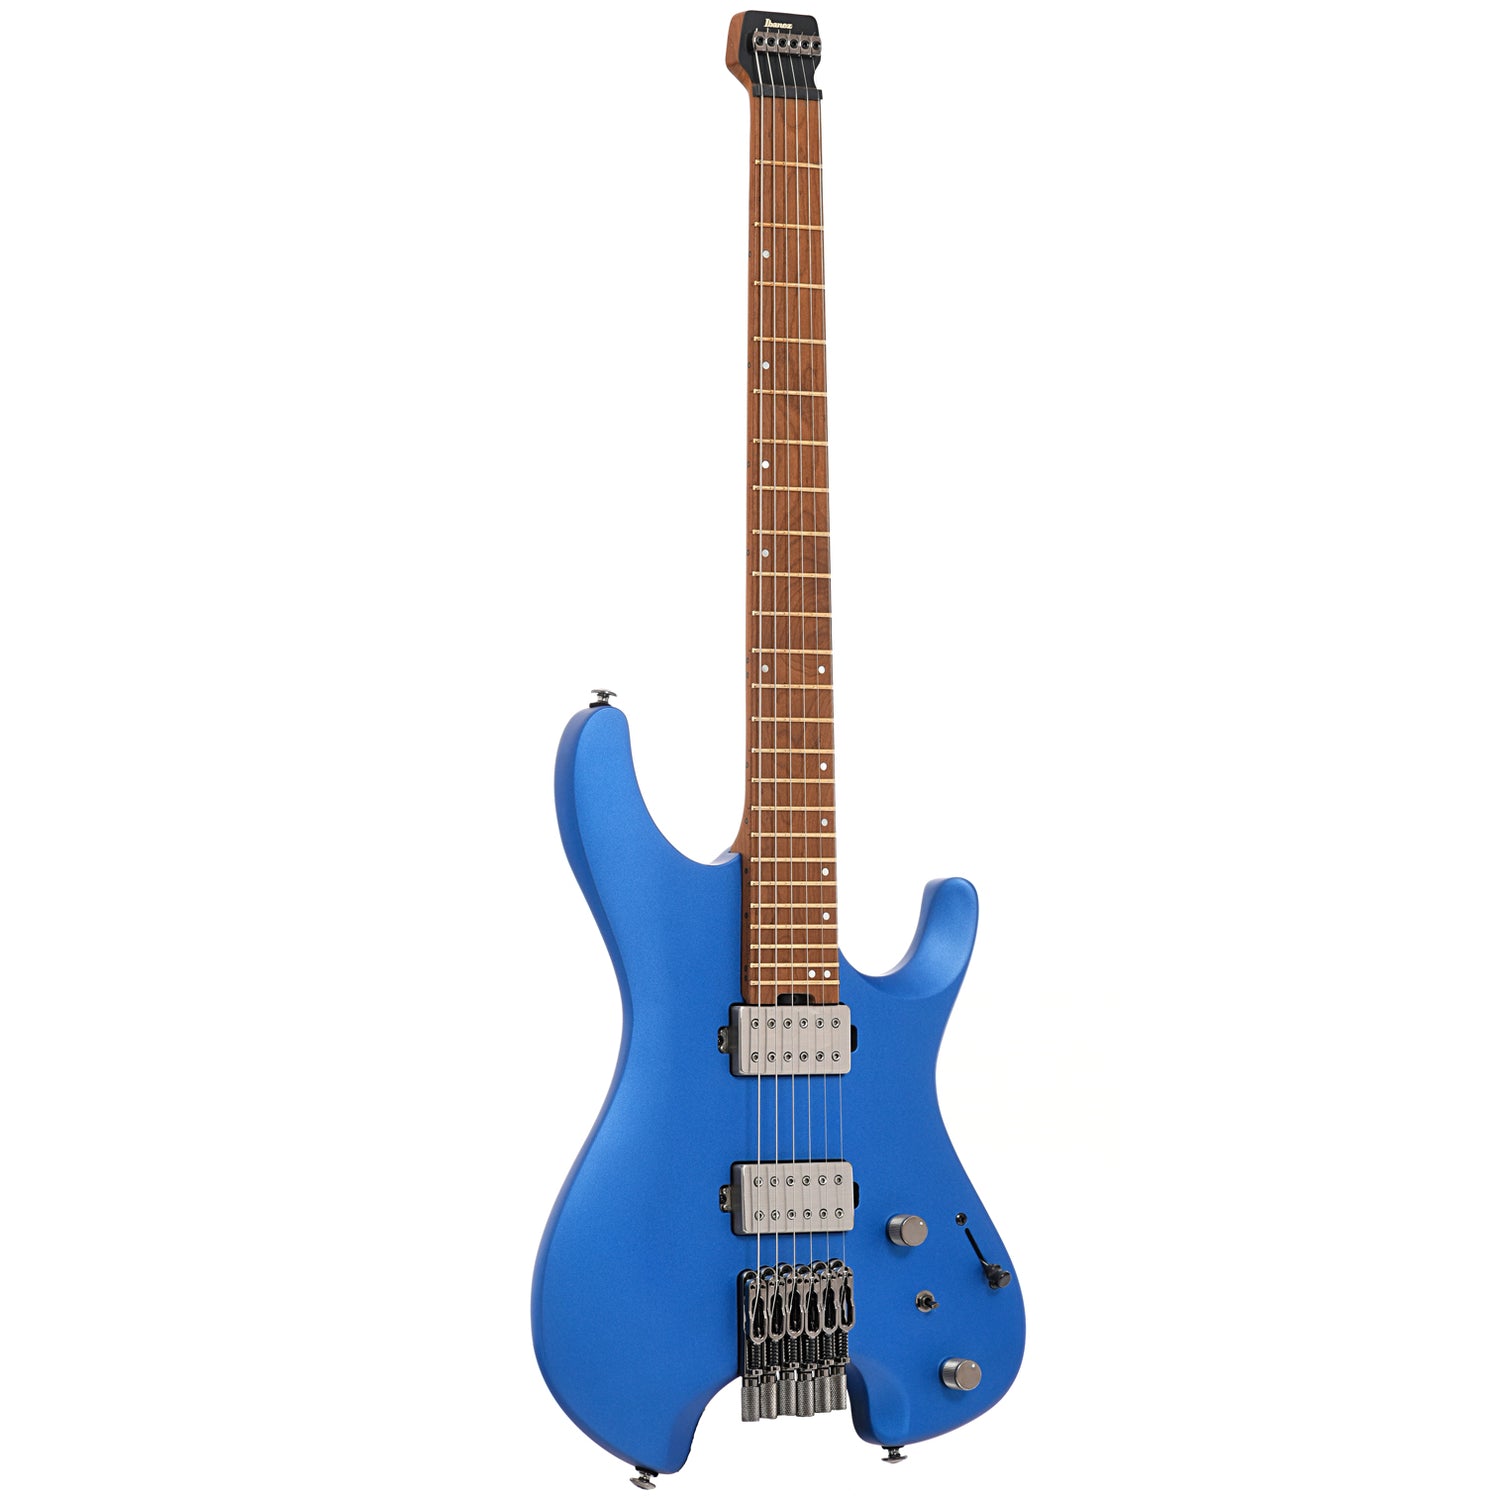 Full front and side of Ibanez Q52 Electric Guitar, Laser Blue Matte